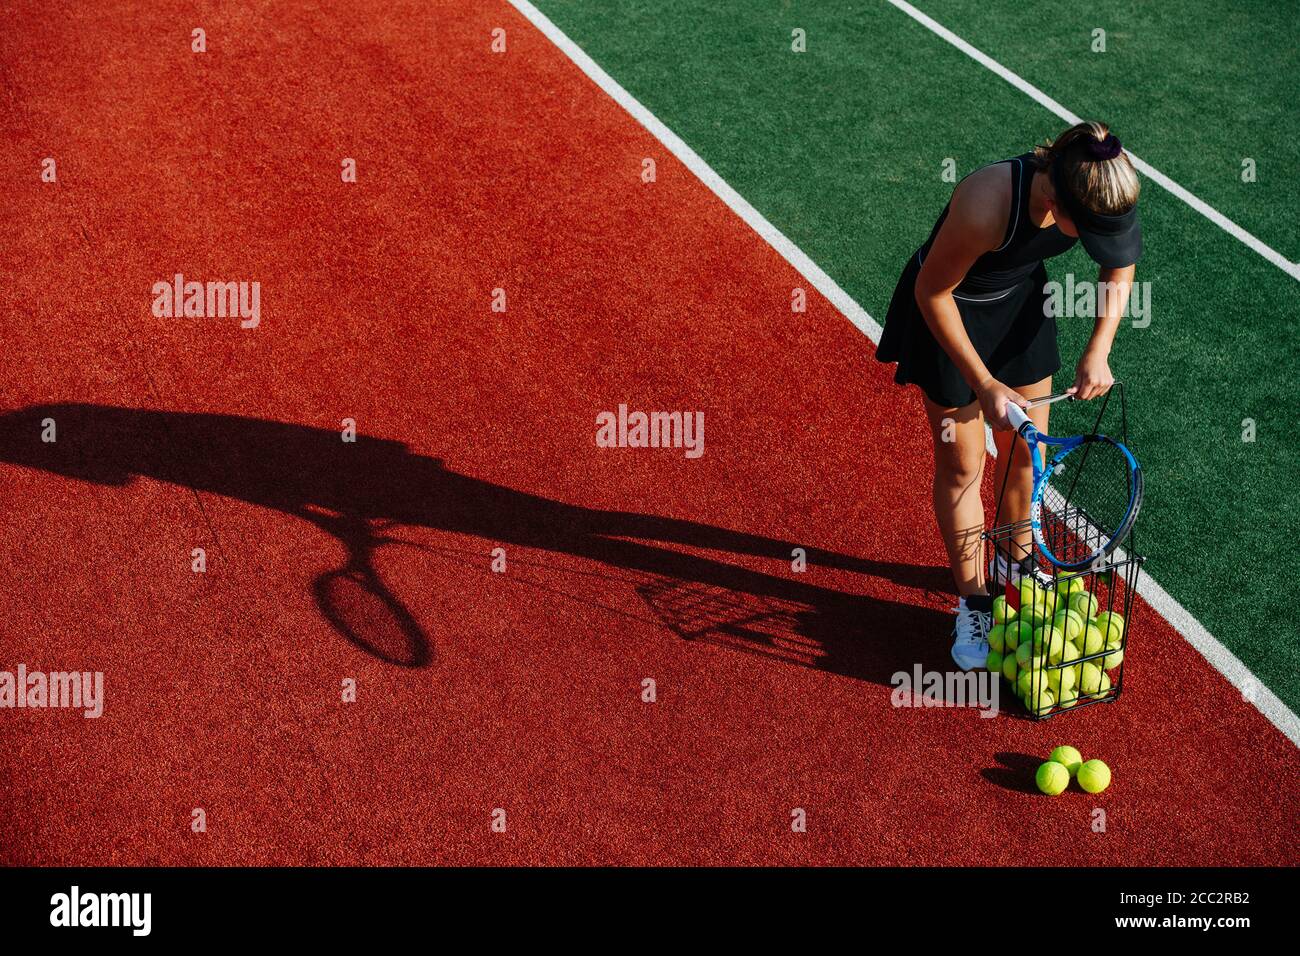 Young girl managing tennis ball basket on court. Stock Photo